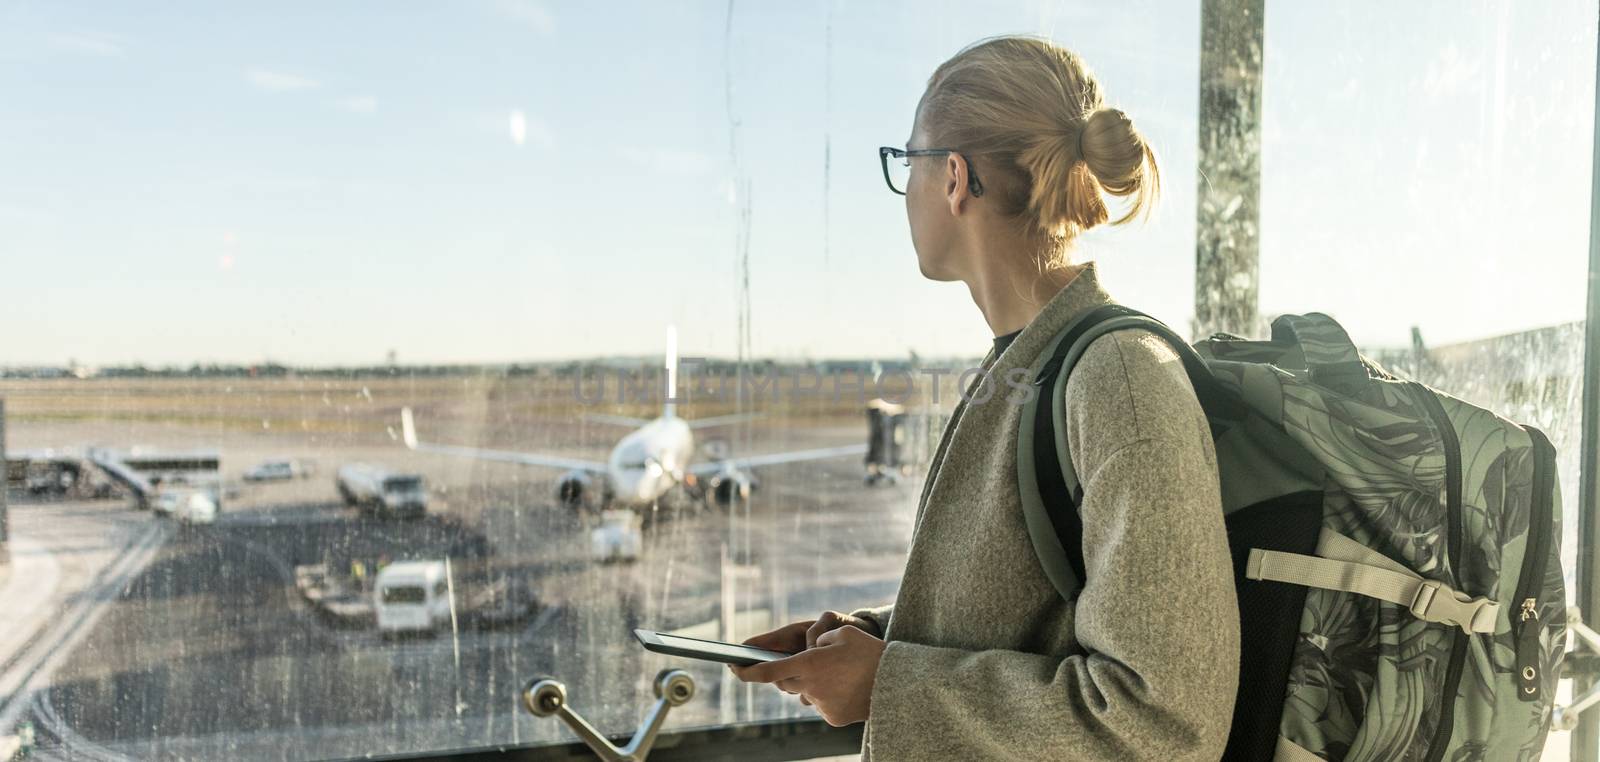 Young woman standing near airport gates window holding cellphone in her hands, wearing travel backpack and walking to lounge area. Female traveler search online map at the airport.